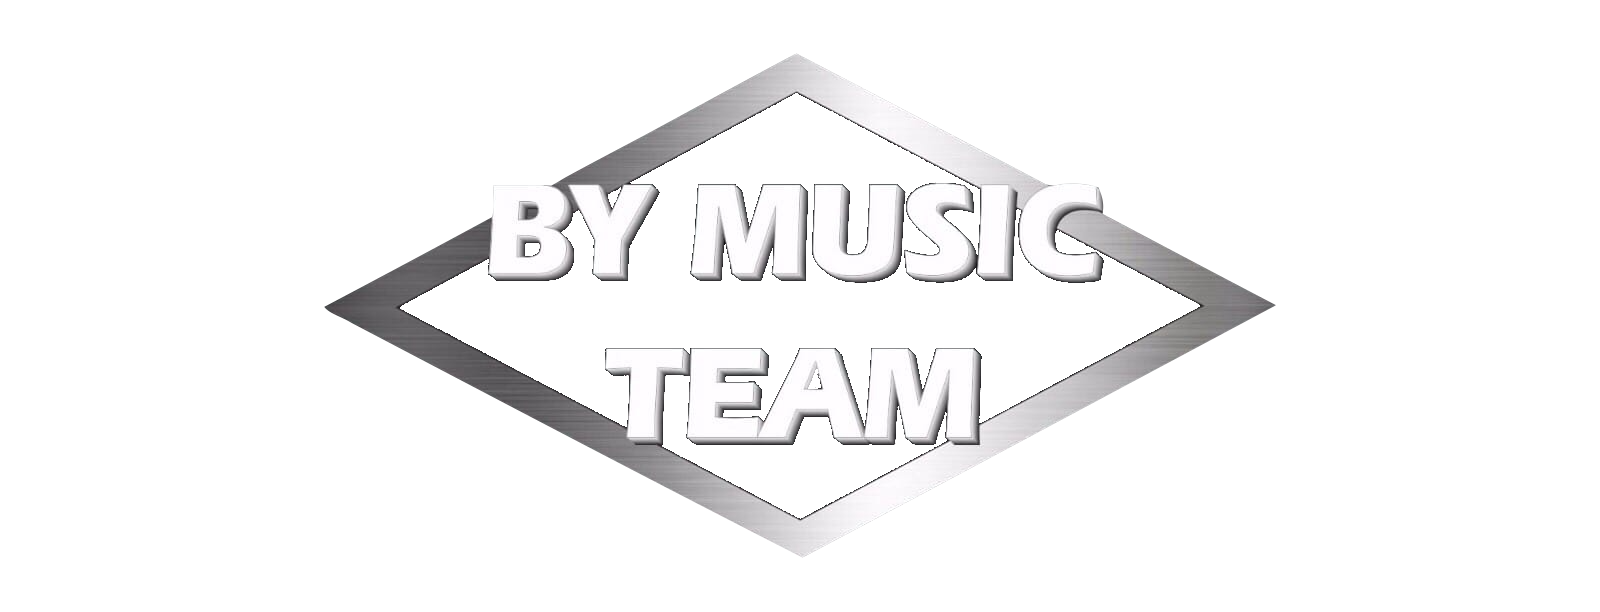 ByMusicTeam.png